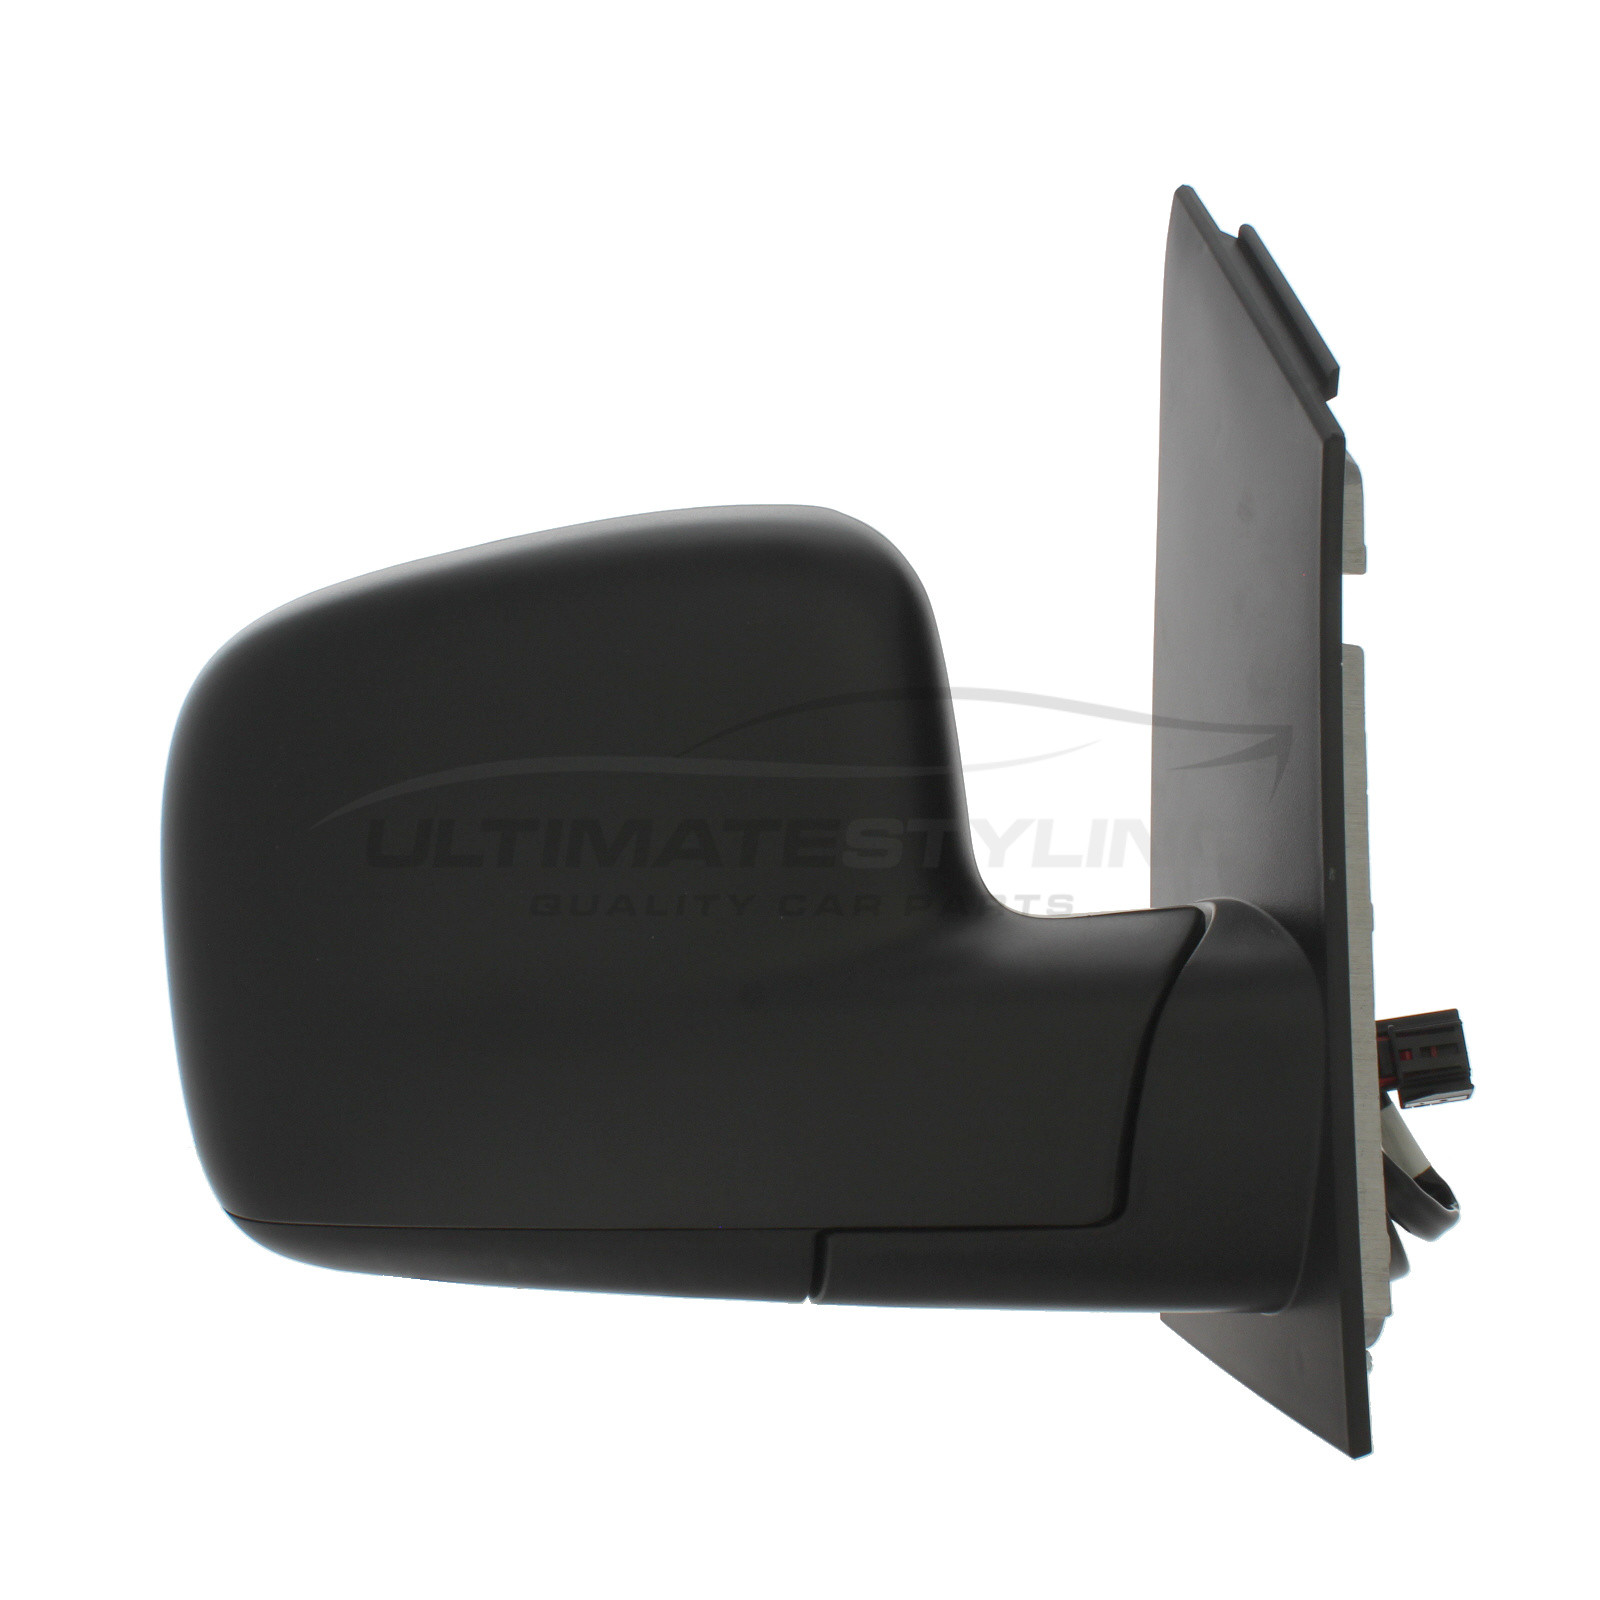 Maxi Life 2004-2010 Left  Side Wing Mirror Glass Left Hand Drive VW Caddy